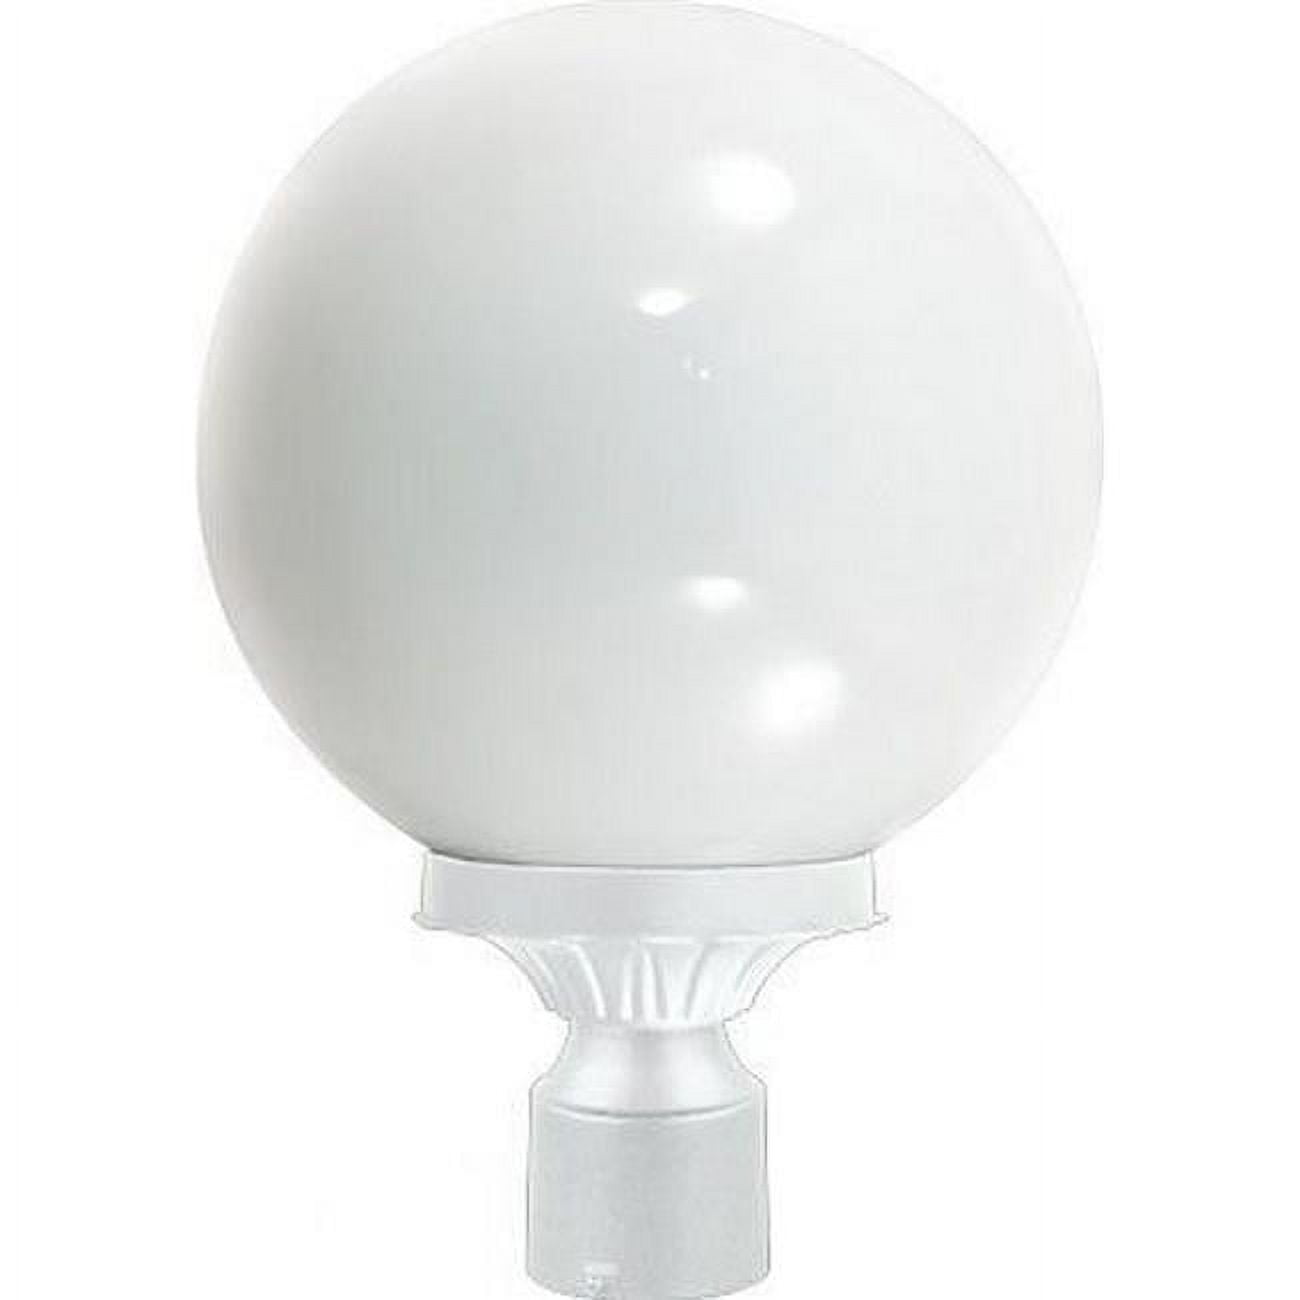 Picture of Dabmar Lighting GM242-W Emily Post Top Fixture - 26W DL-S26-GU24 120V, White